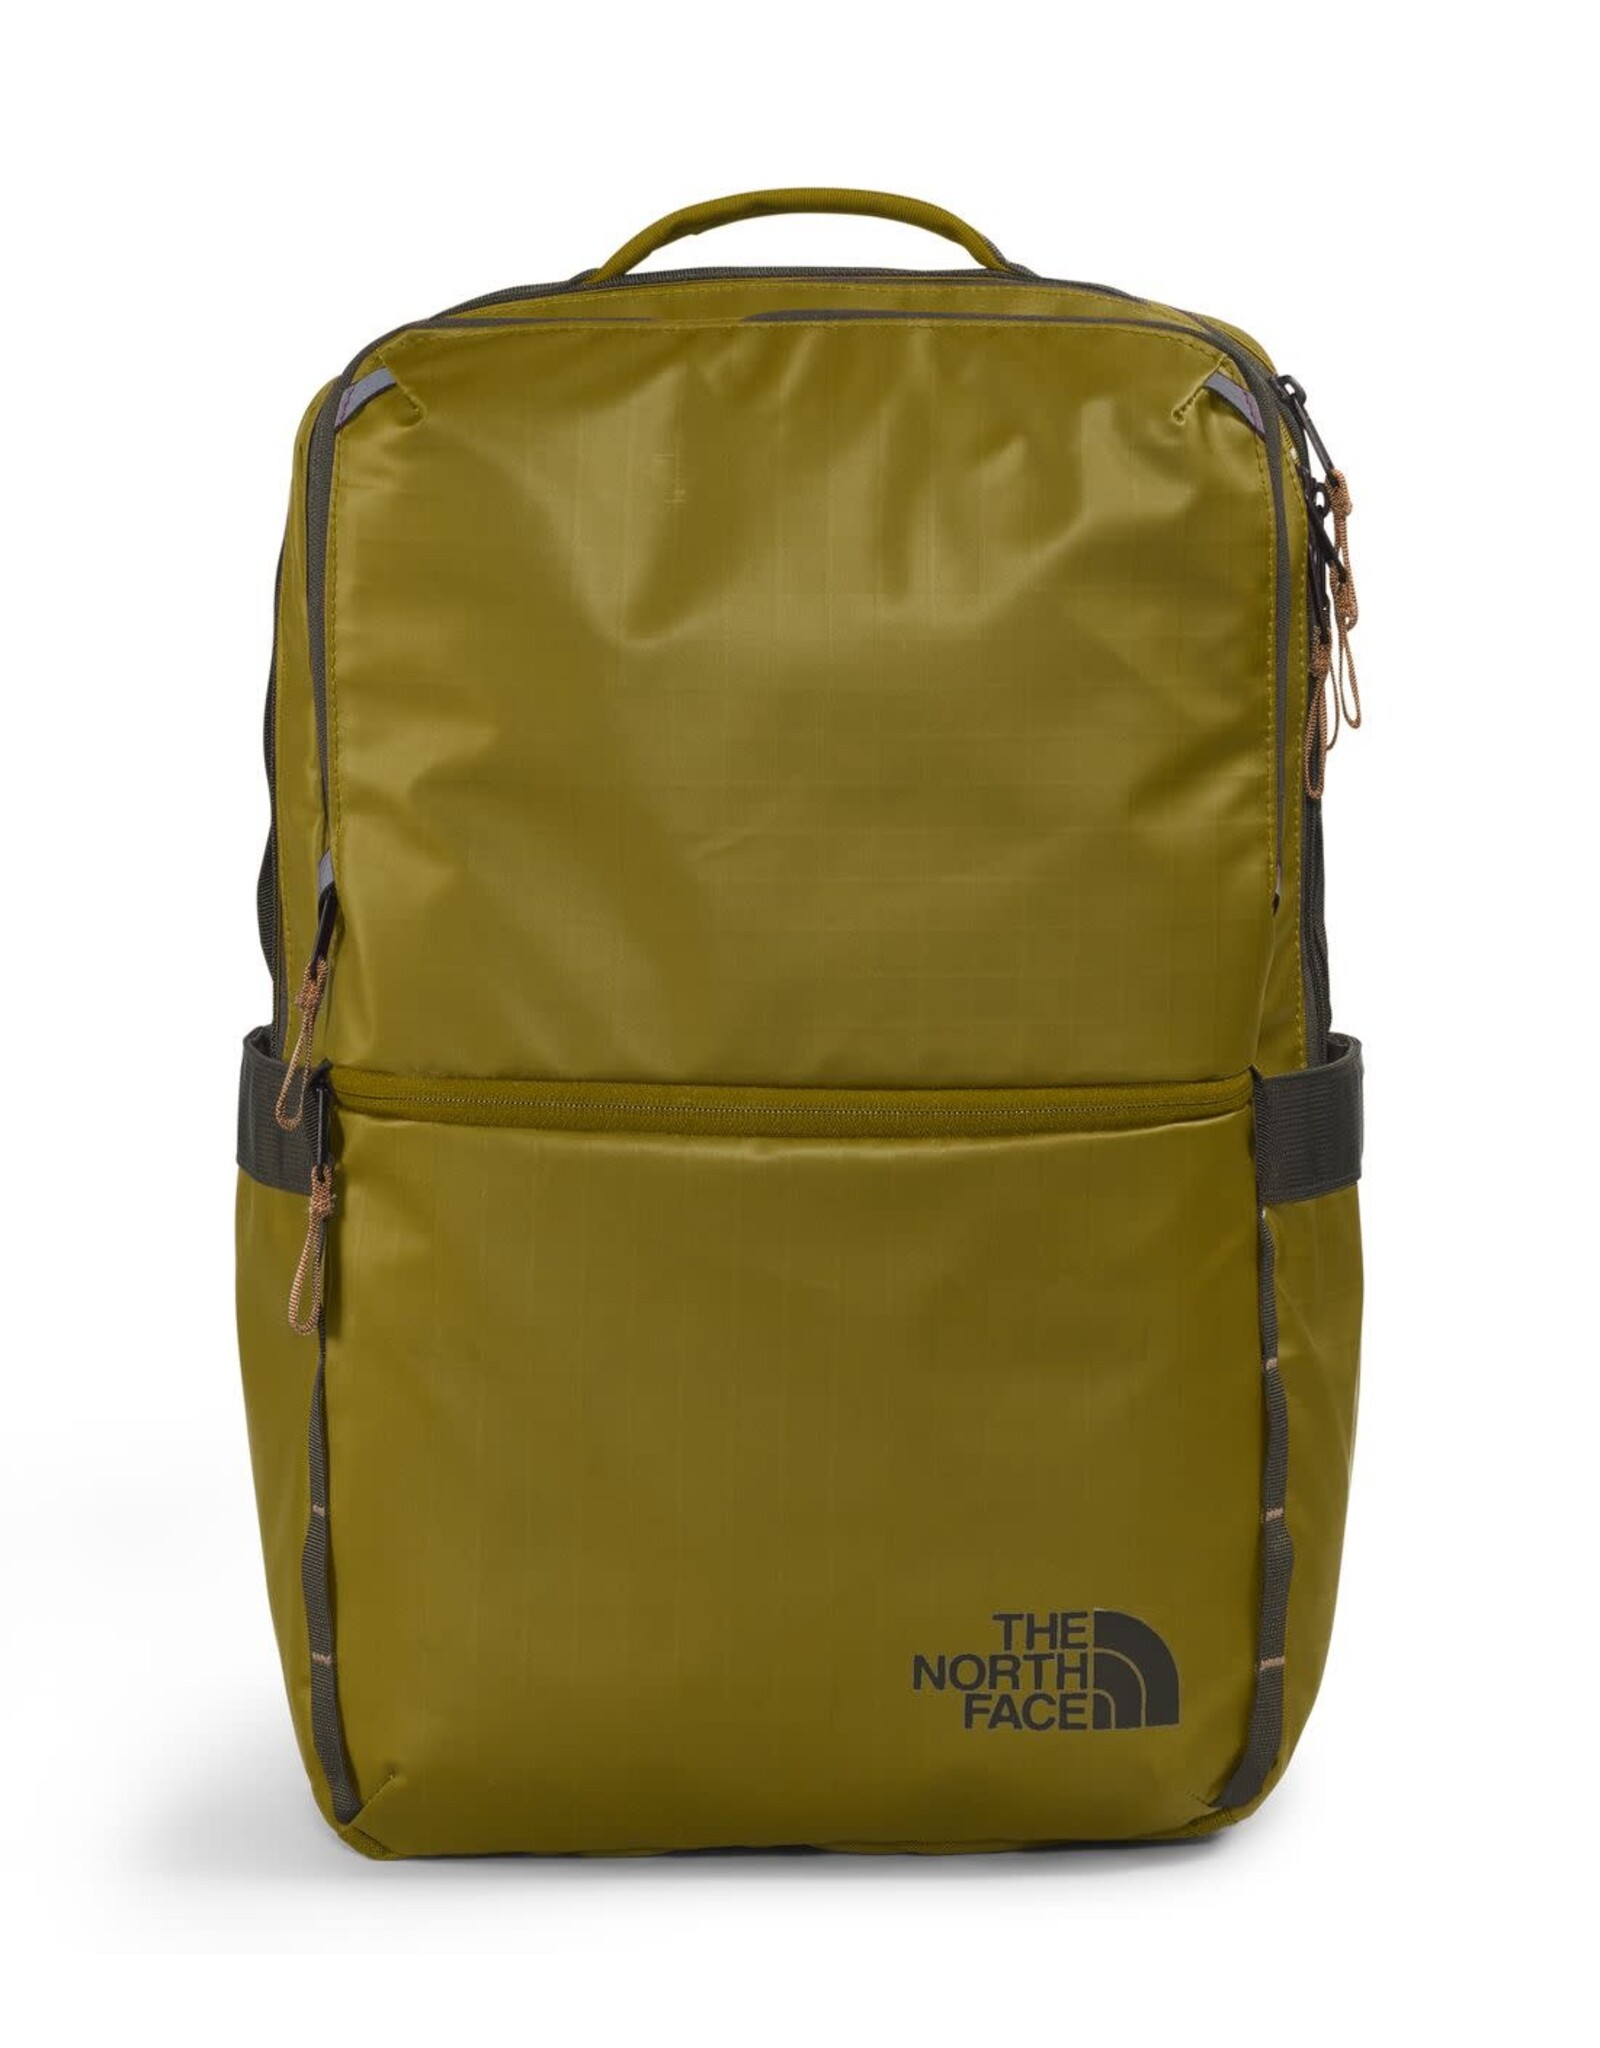 THE NORTH FACE BASE CAMP VOYAGER DAYPACK